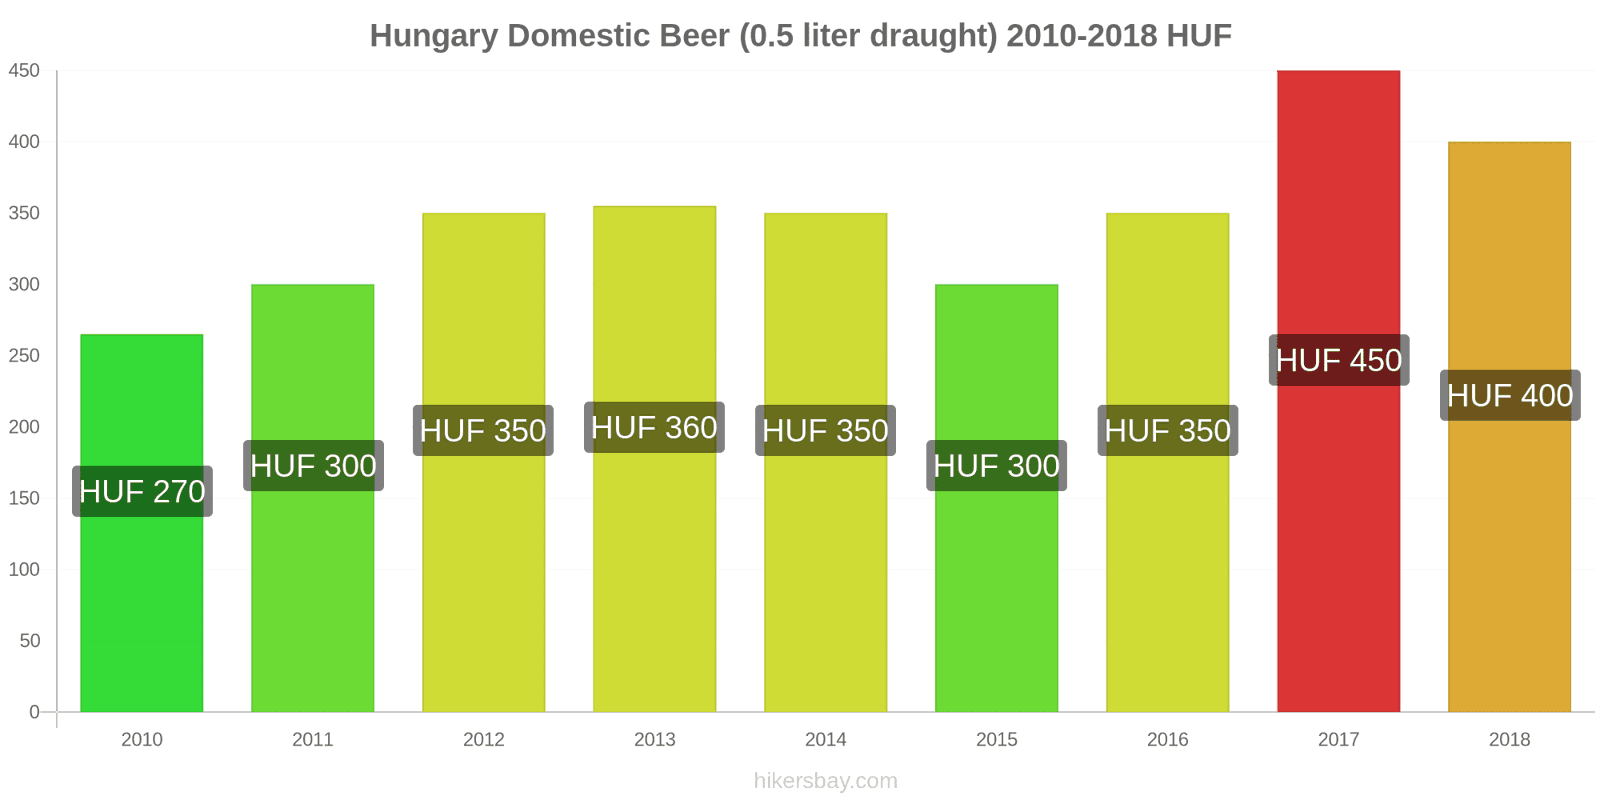 Hungary price changes Domestic Beer (0.5 liter draught) hikersbay.com